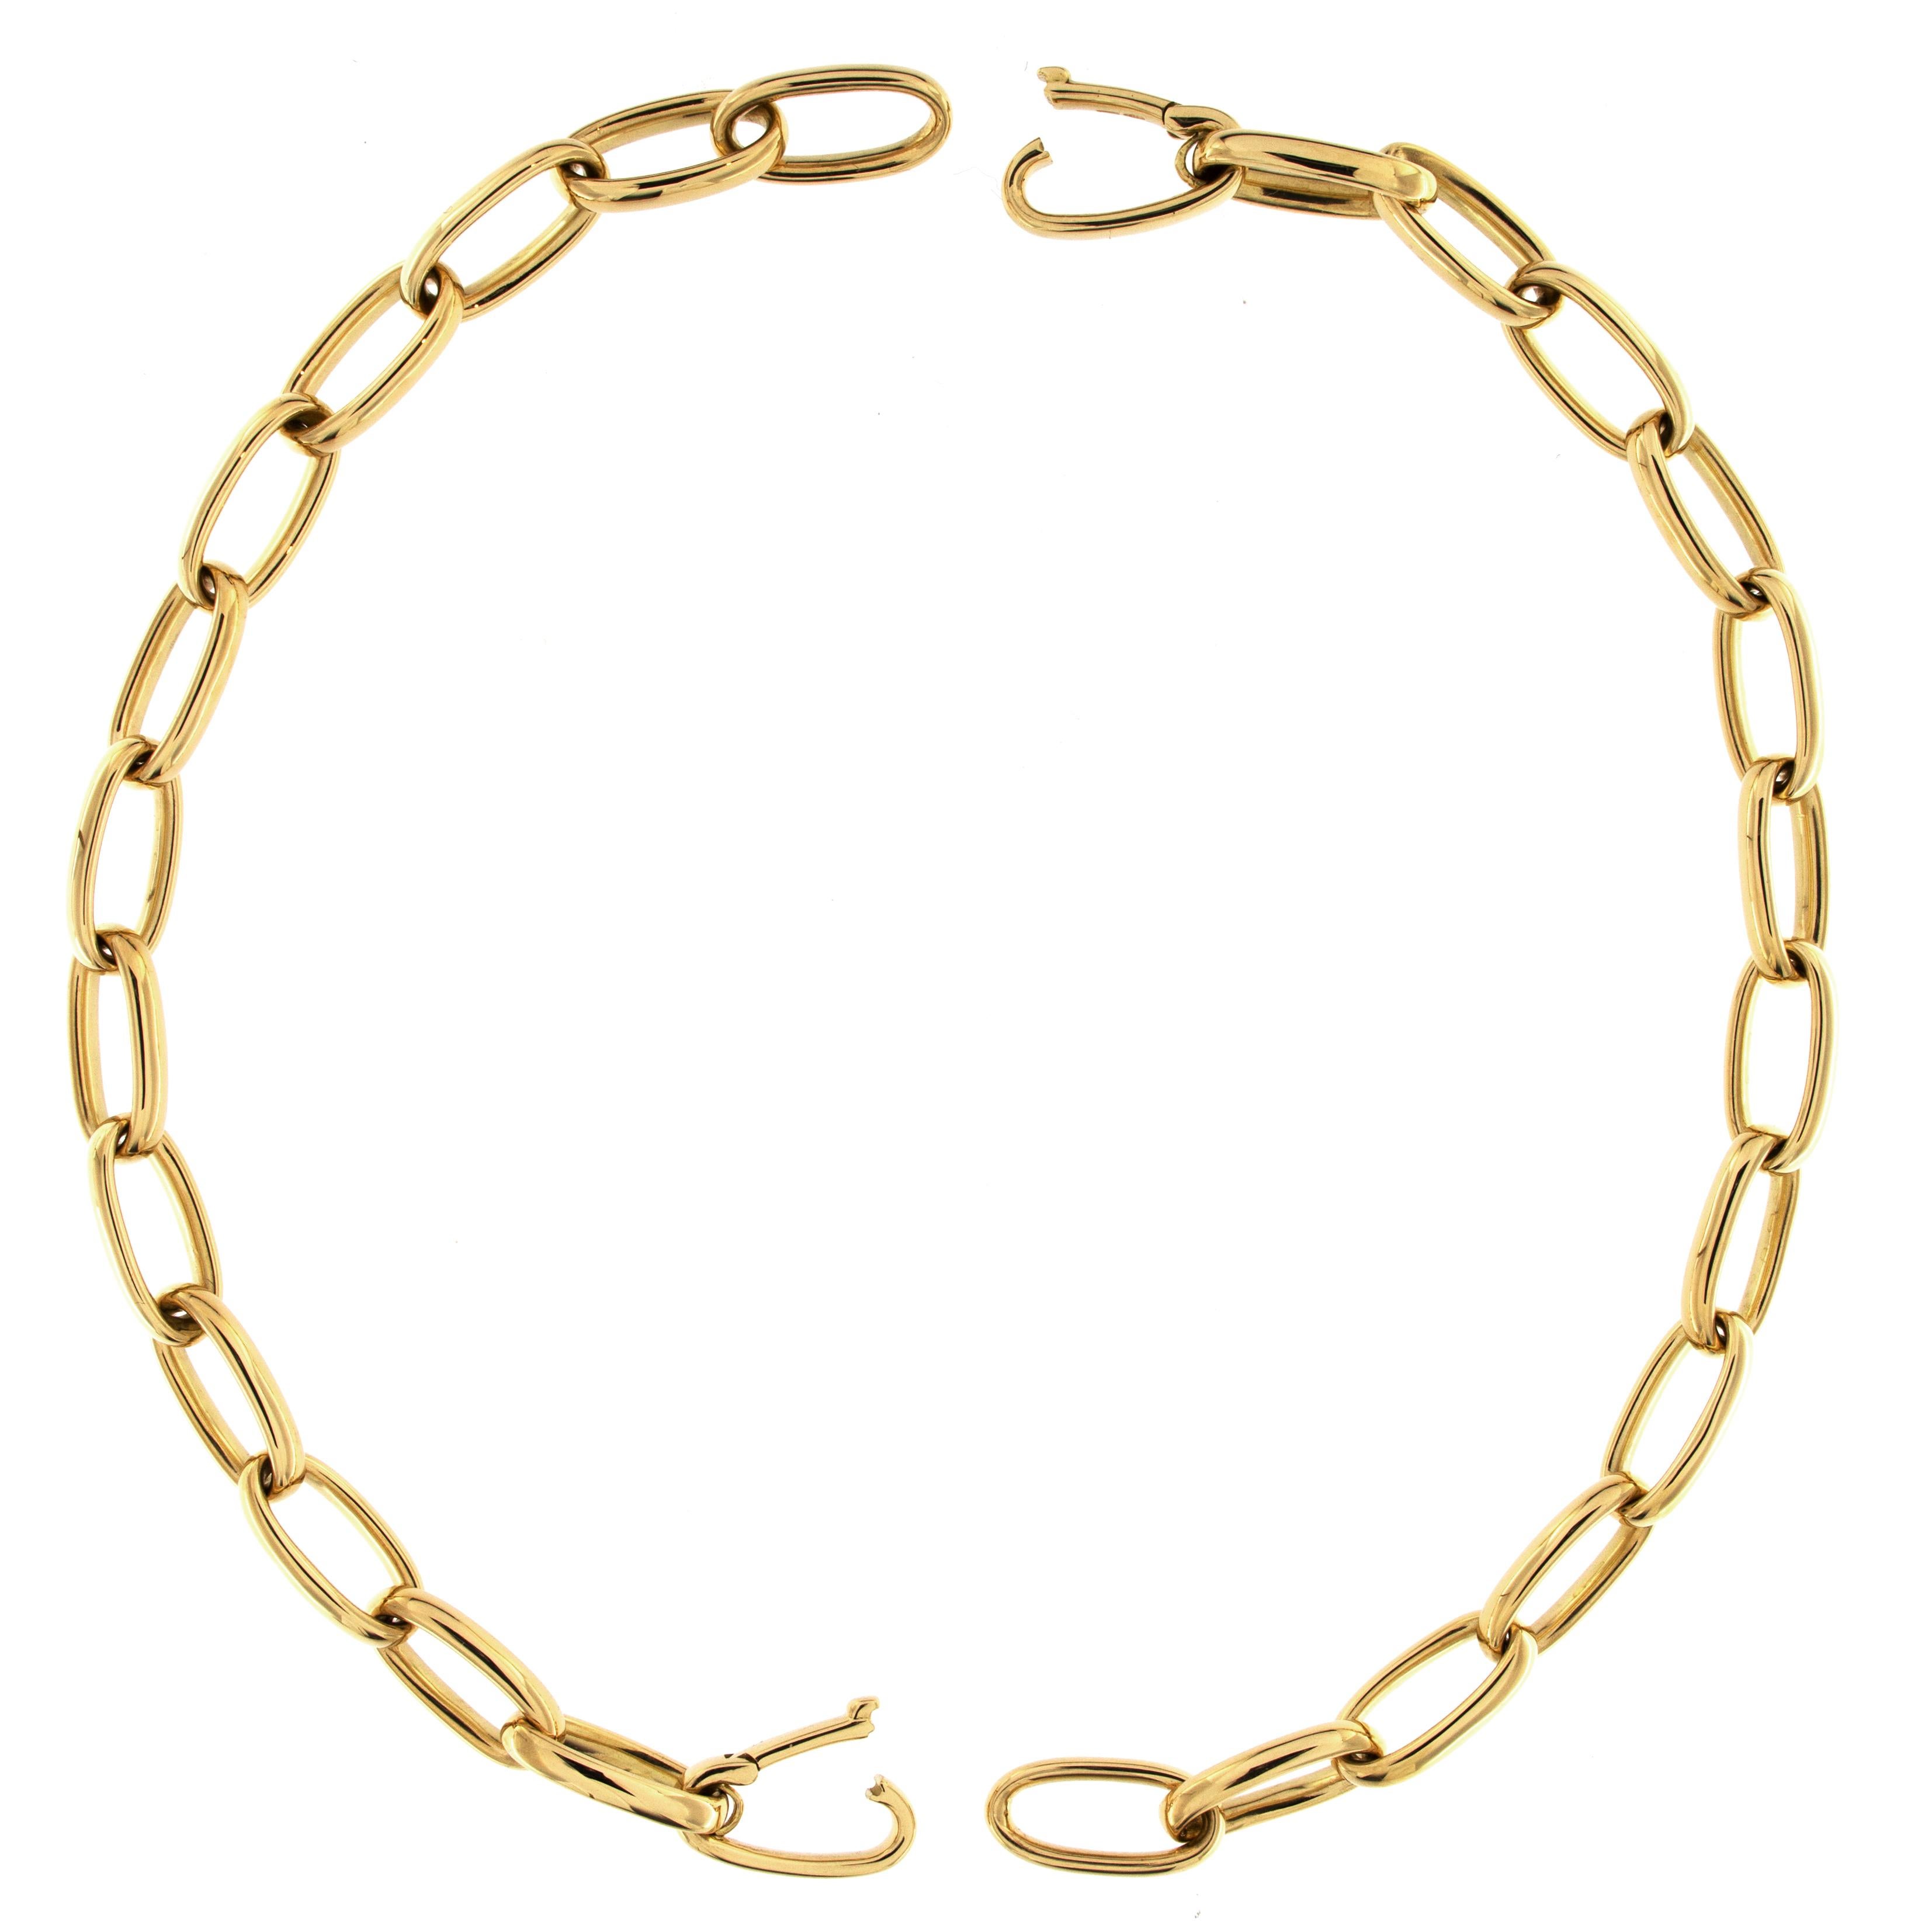 Jona Design Collection, Hand crafted in Italy, 18 karat yellow gold link chain necklace. 
Dimension : L 16.73 in X W 0.36 in - L 42,5 cm X W 9.1 mm
All Jona jewelry is new and has never been previously owned or worn. Each item will arrive at your